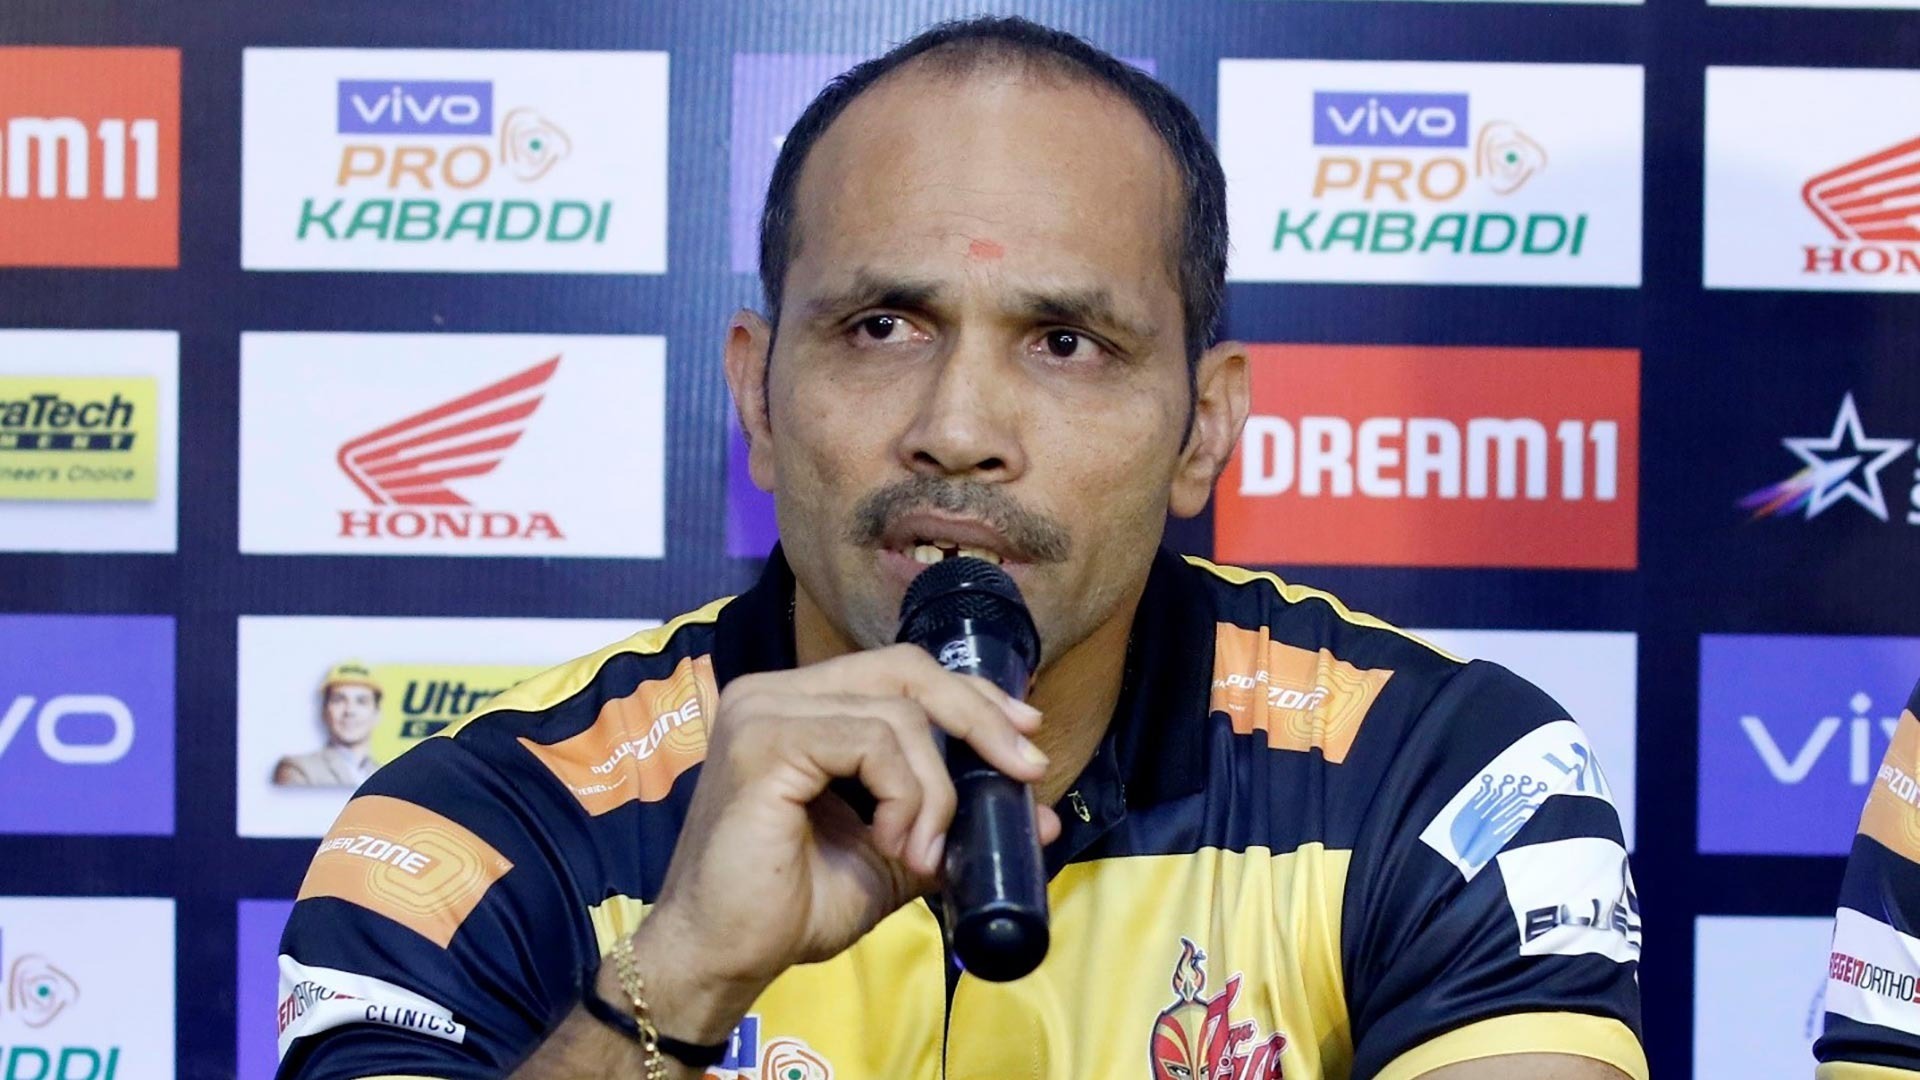 PKL 2019 | It was an excellent game of kabaddi but we were unlucky, says Jagdish Kumble